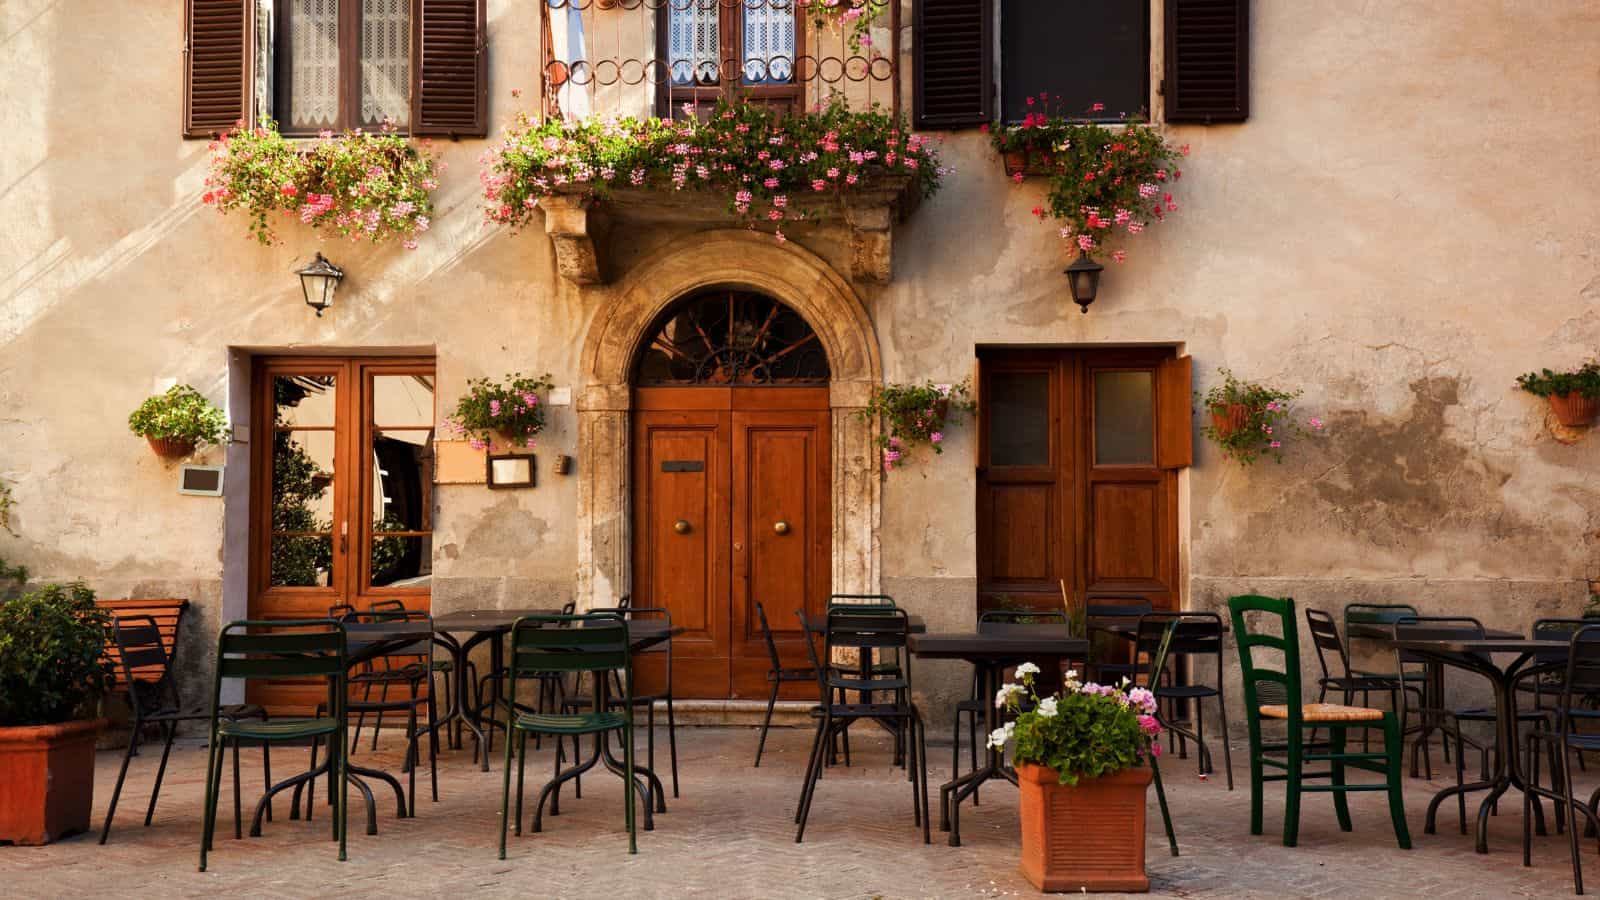 Cafe in Italy